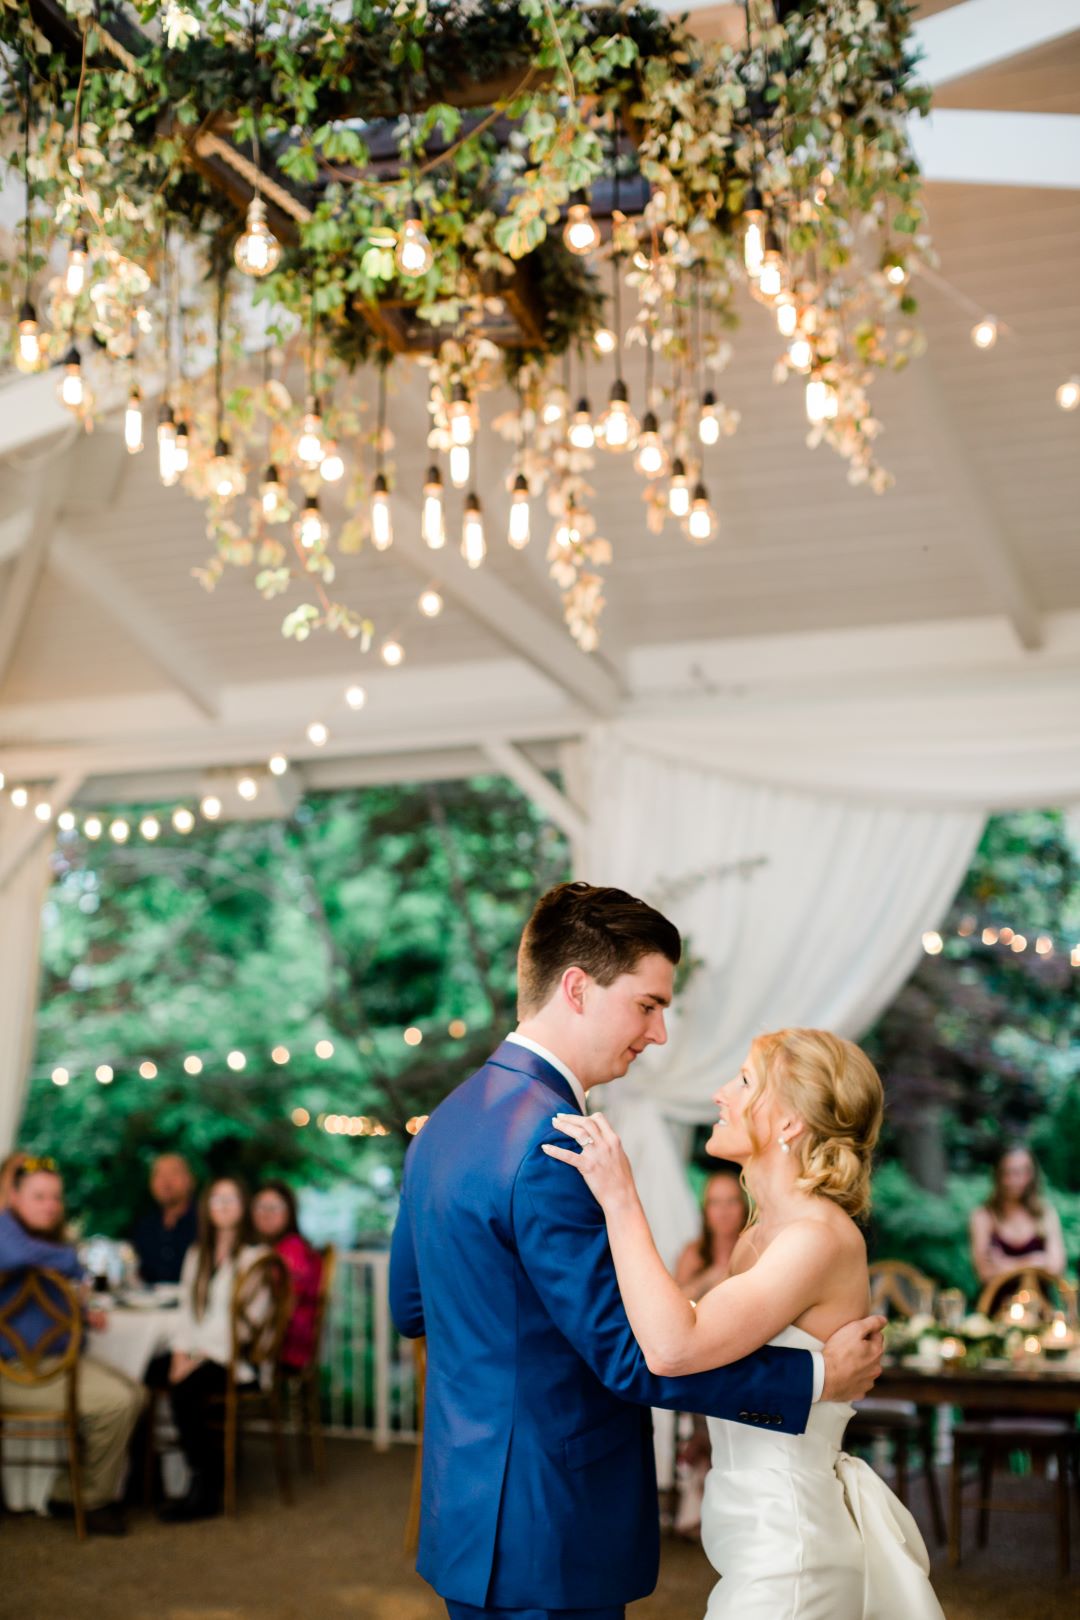 CJ's Off The Square | Bride and groom's first dance under the giant leafy chandelier with edison bulbs